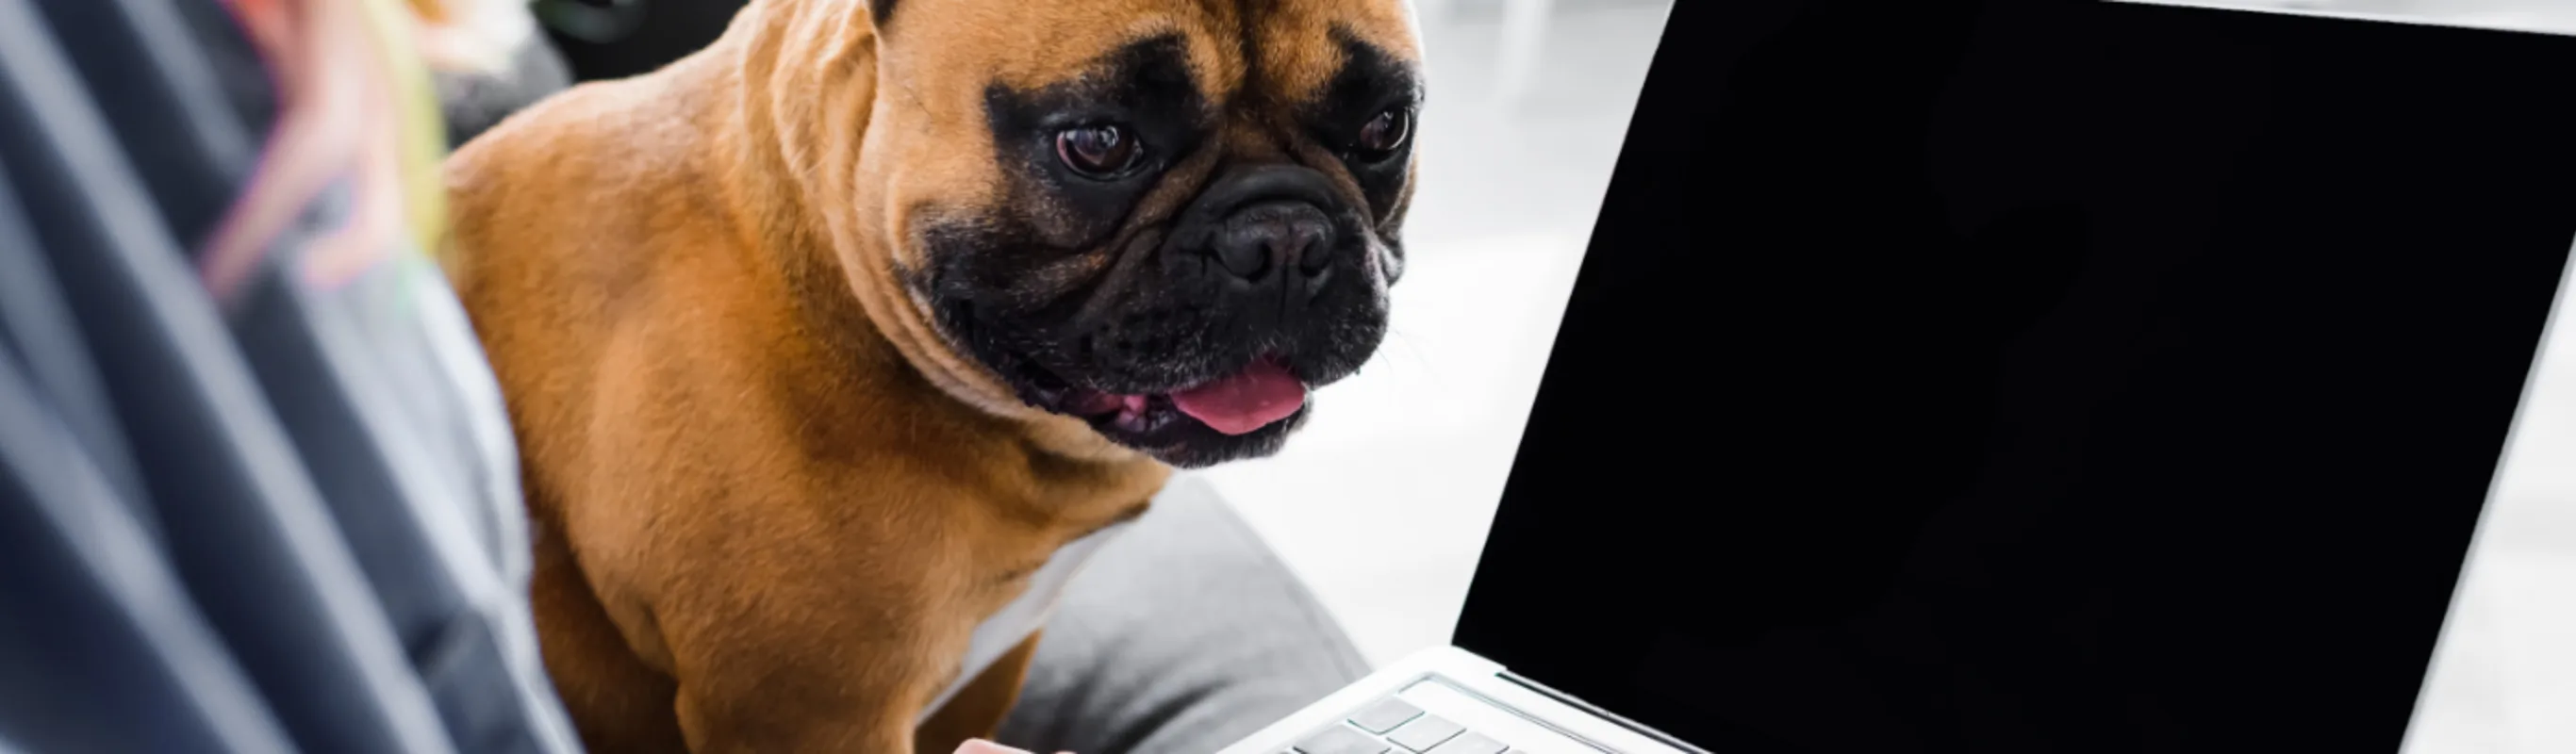 A person using a laptop on a couch with a French Bulldog